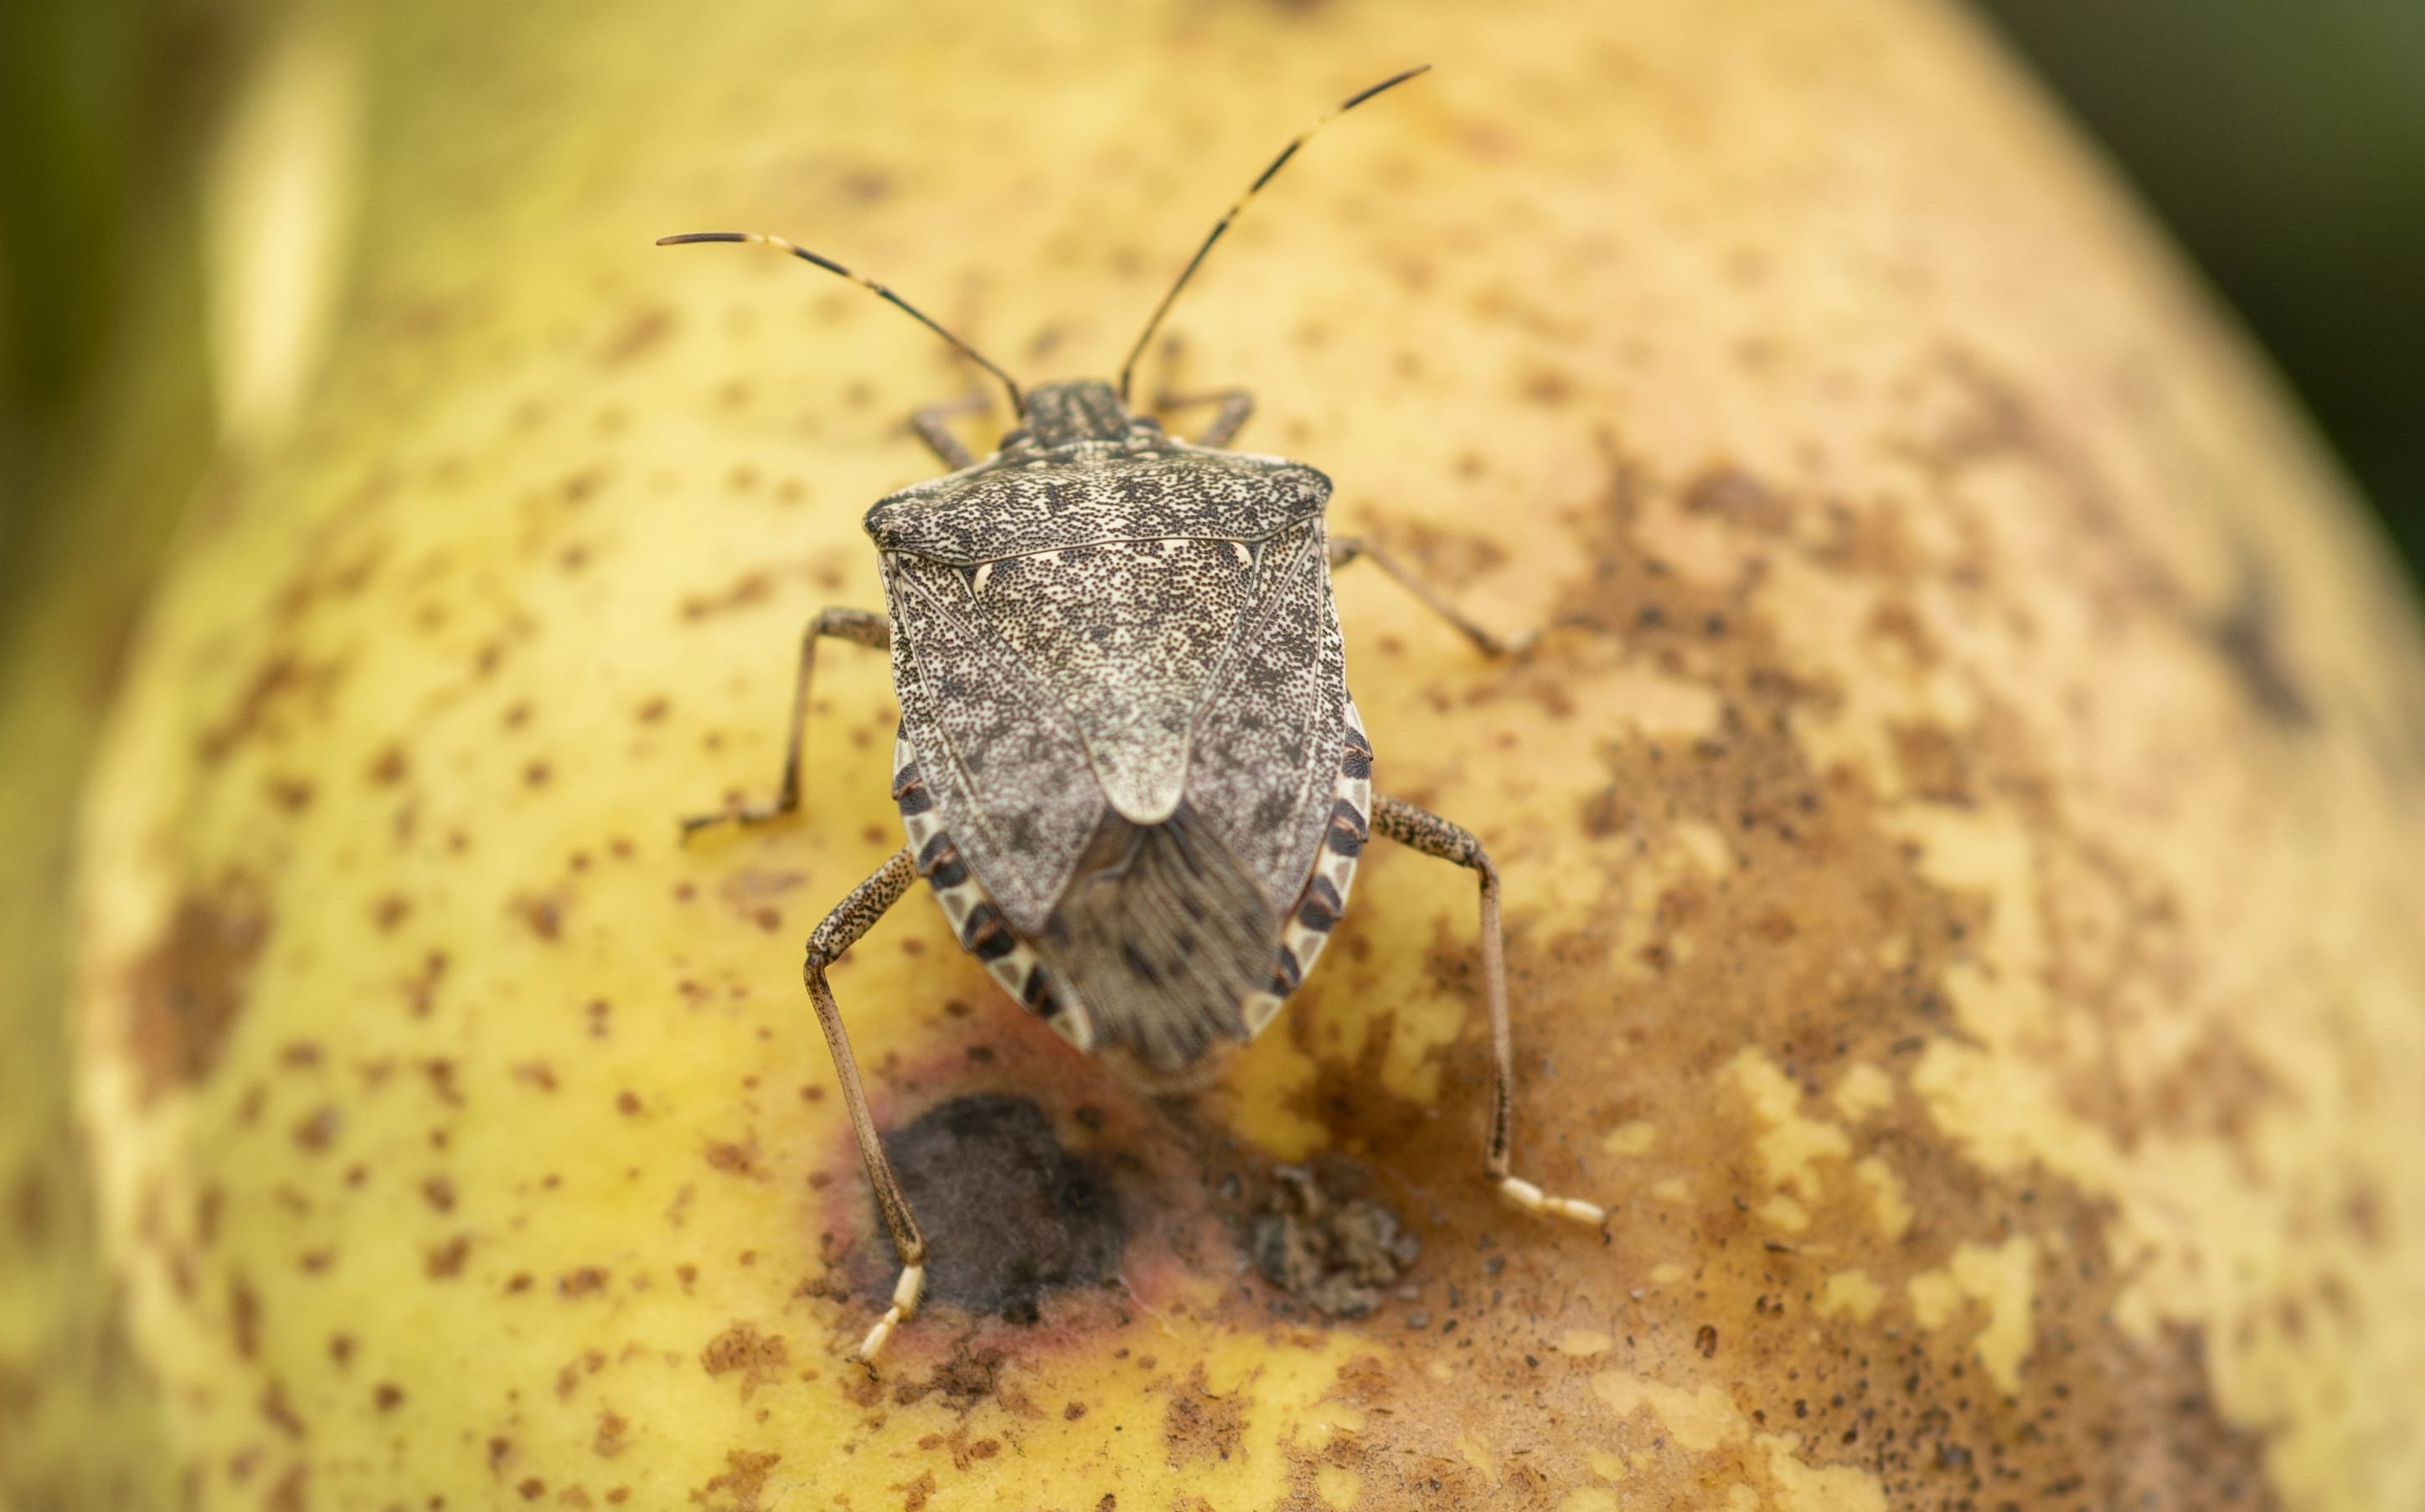 A brown marmorated stink bug on a damaged pear in Italy, where the bug has become a major pest.